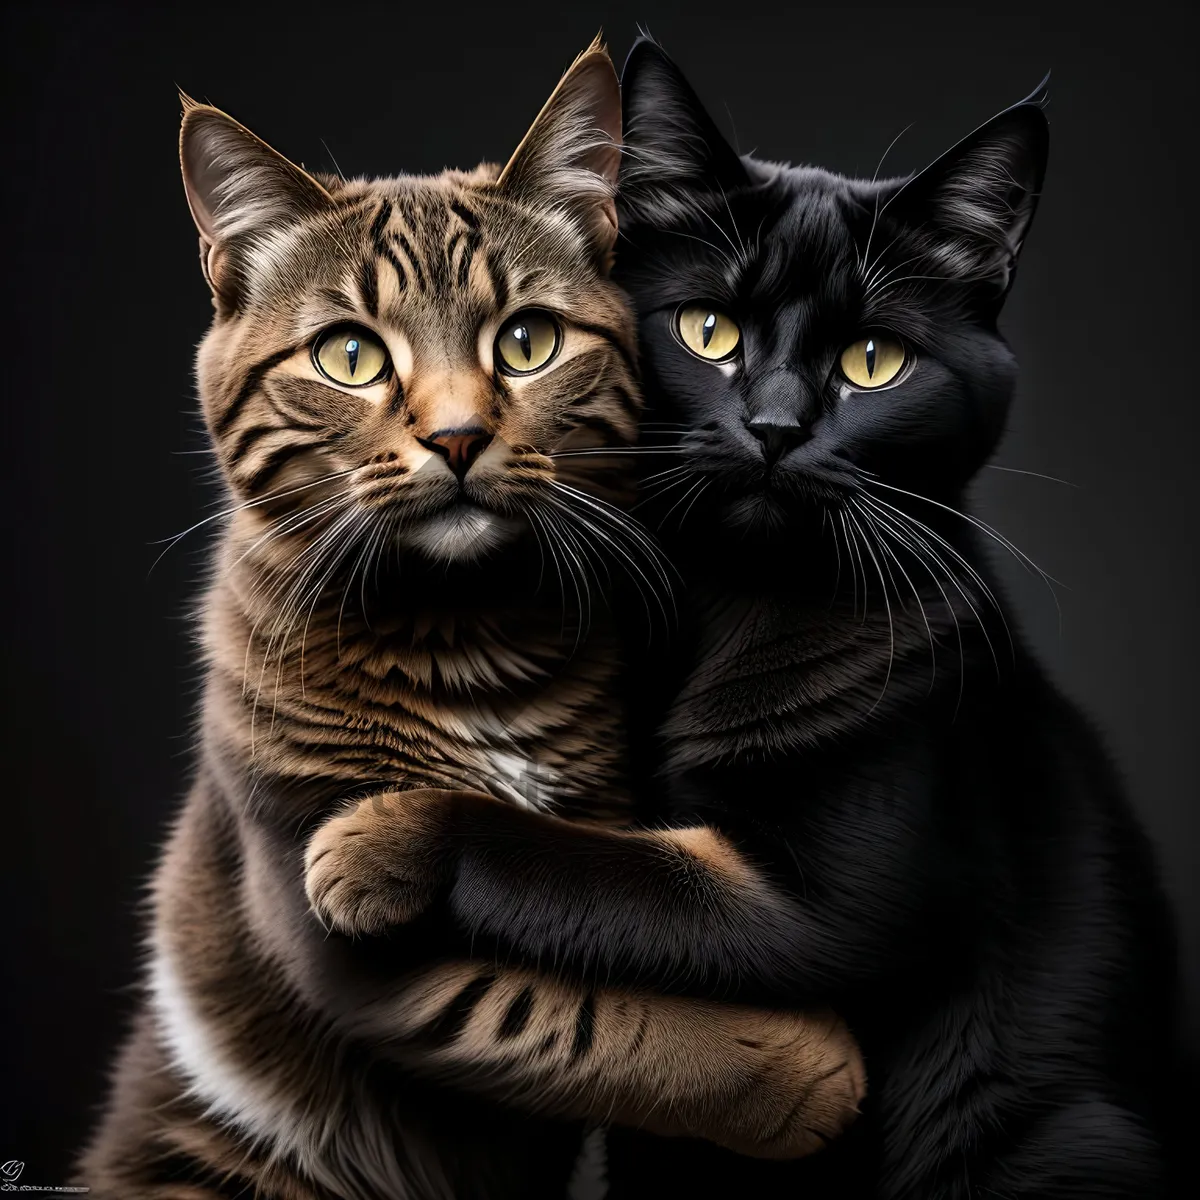 Picture of Furry and Curious Tabby Cat Portrait